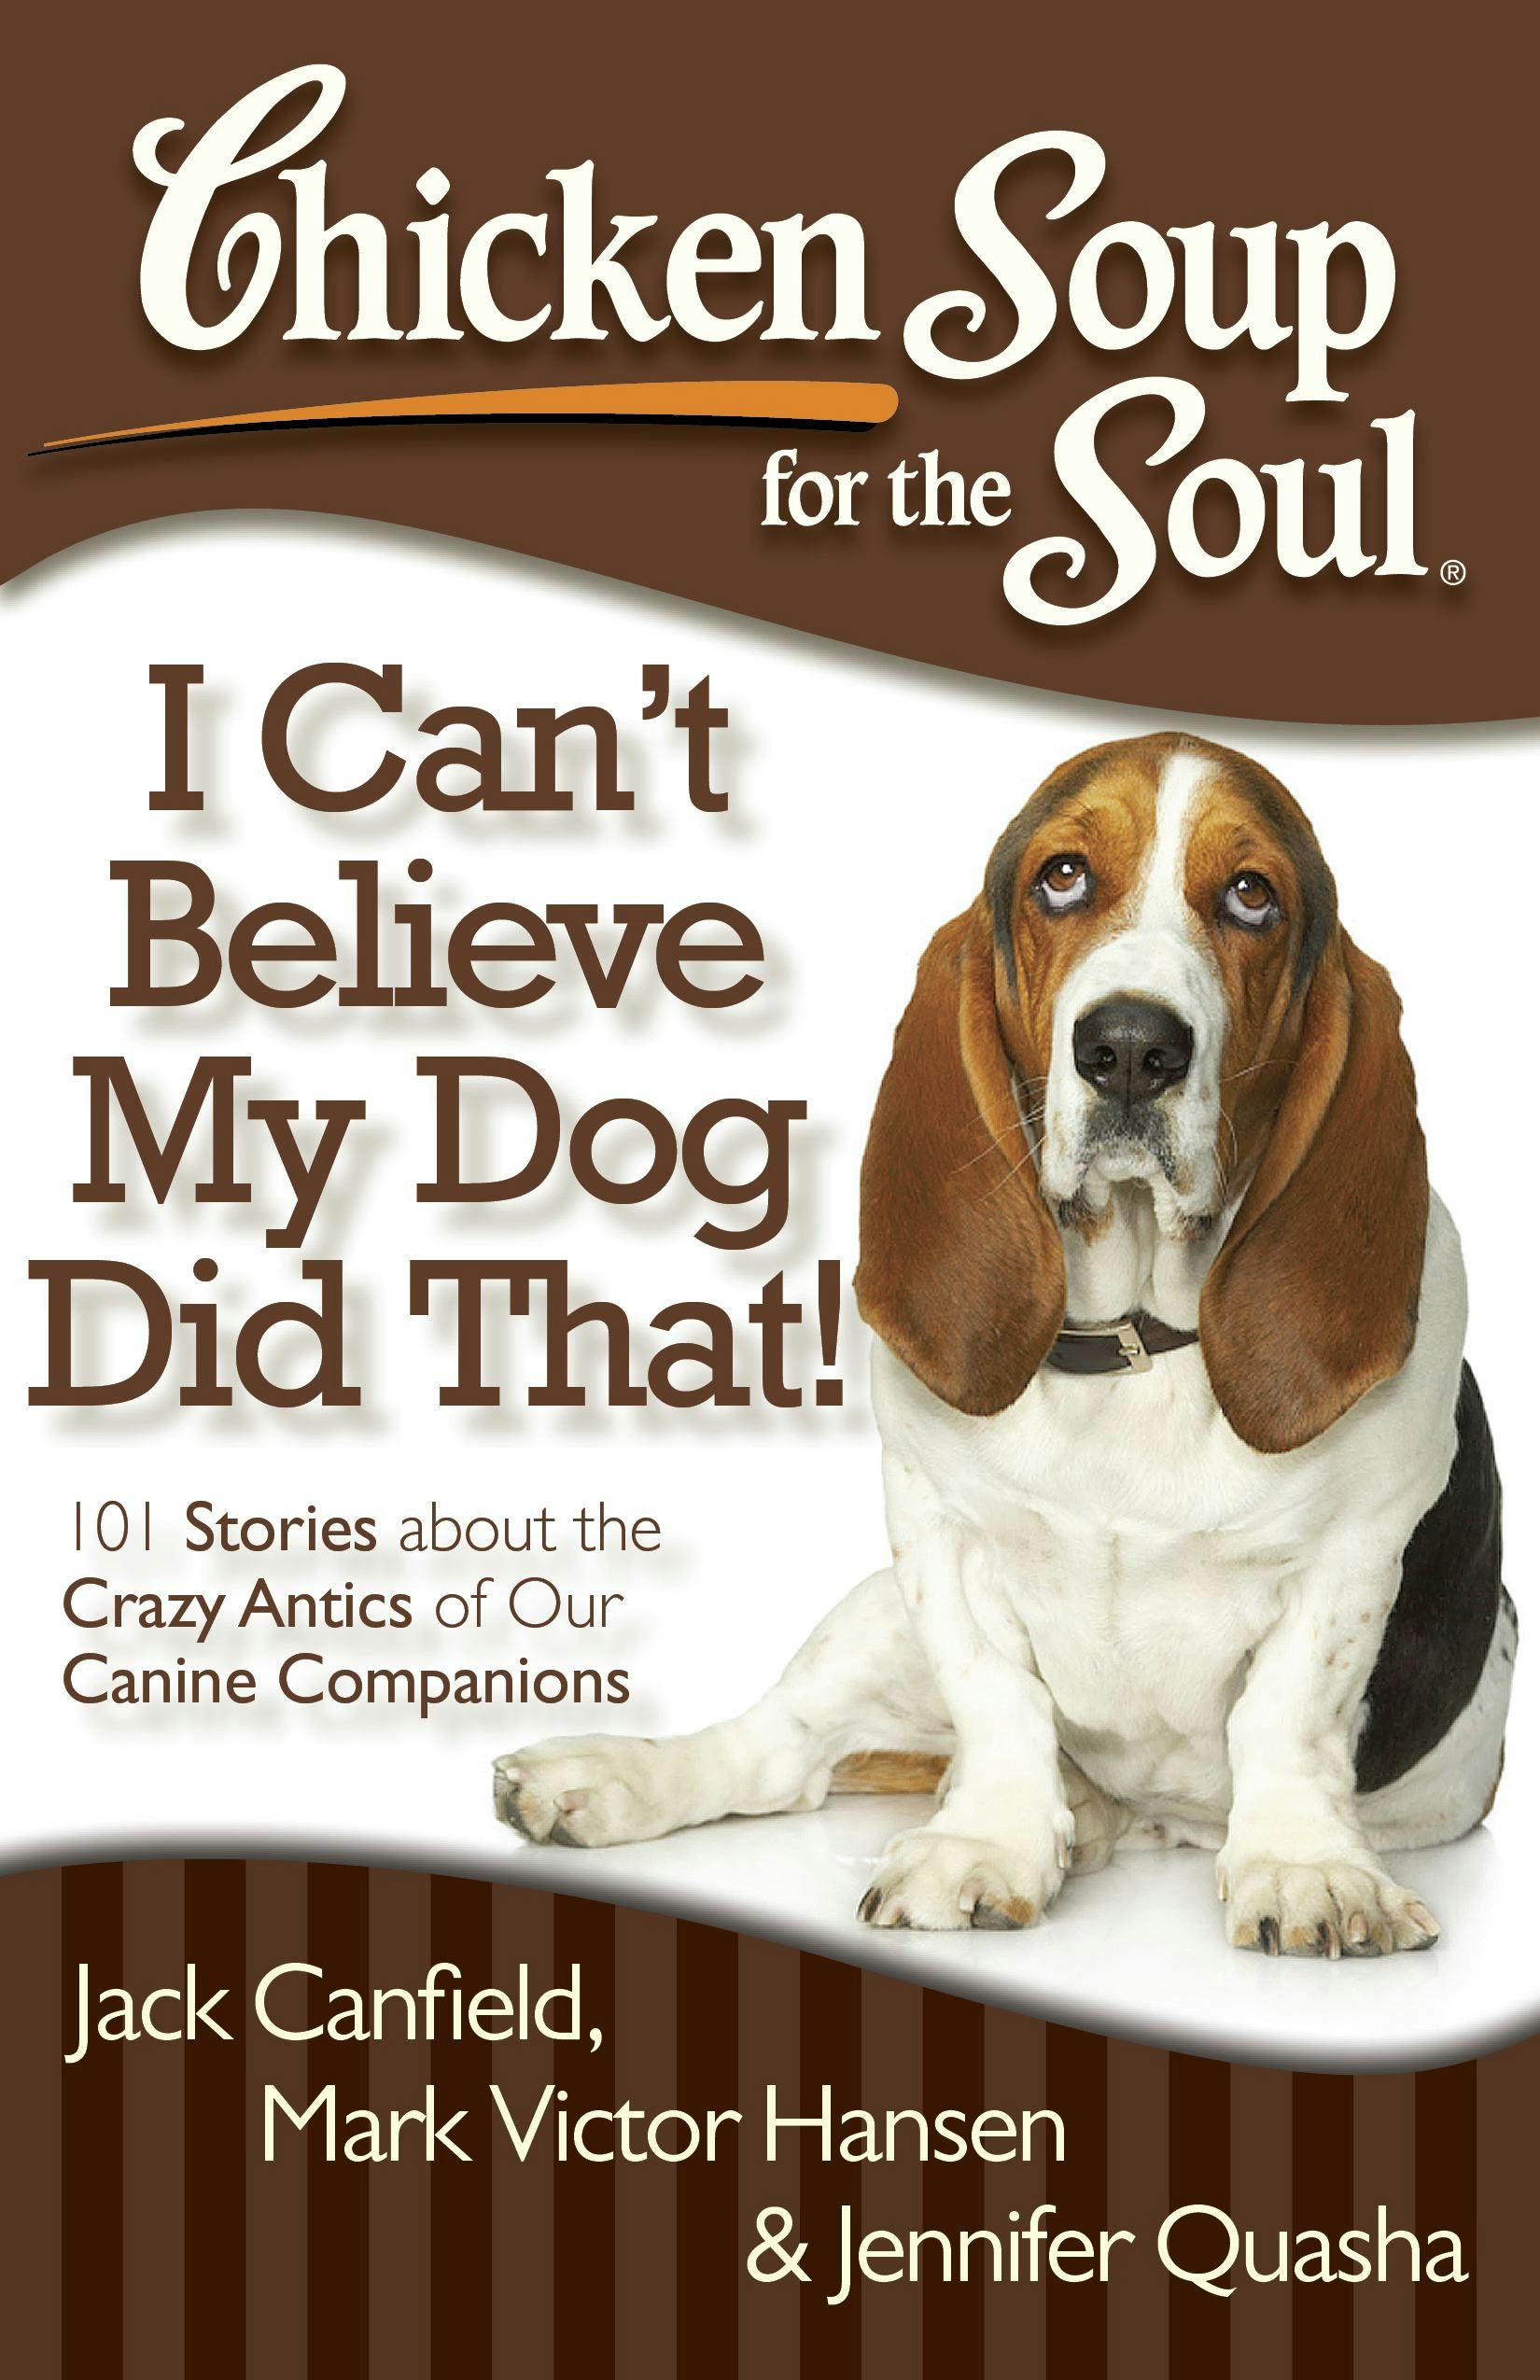 Chicken Soup for the Soul: I Can't Believe My Dog Did That!: 101 Stories about the Crazy Antics of Our Canine Companions - Mark Victor Hansen, Jack Canfield, Jennifer Quasha